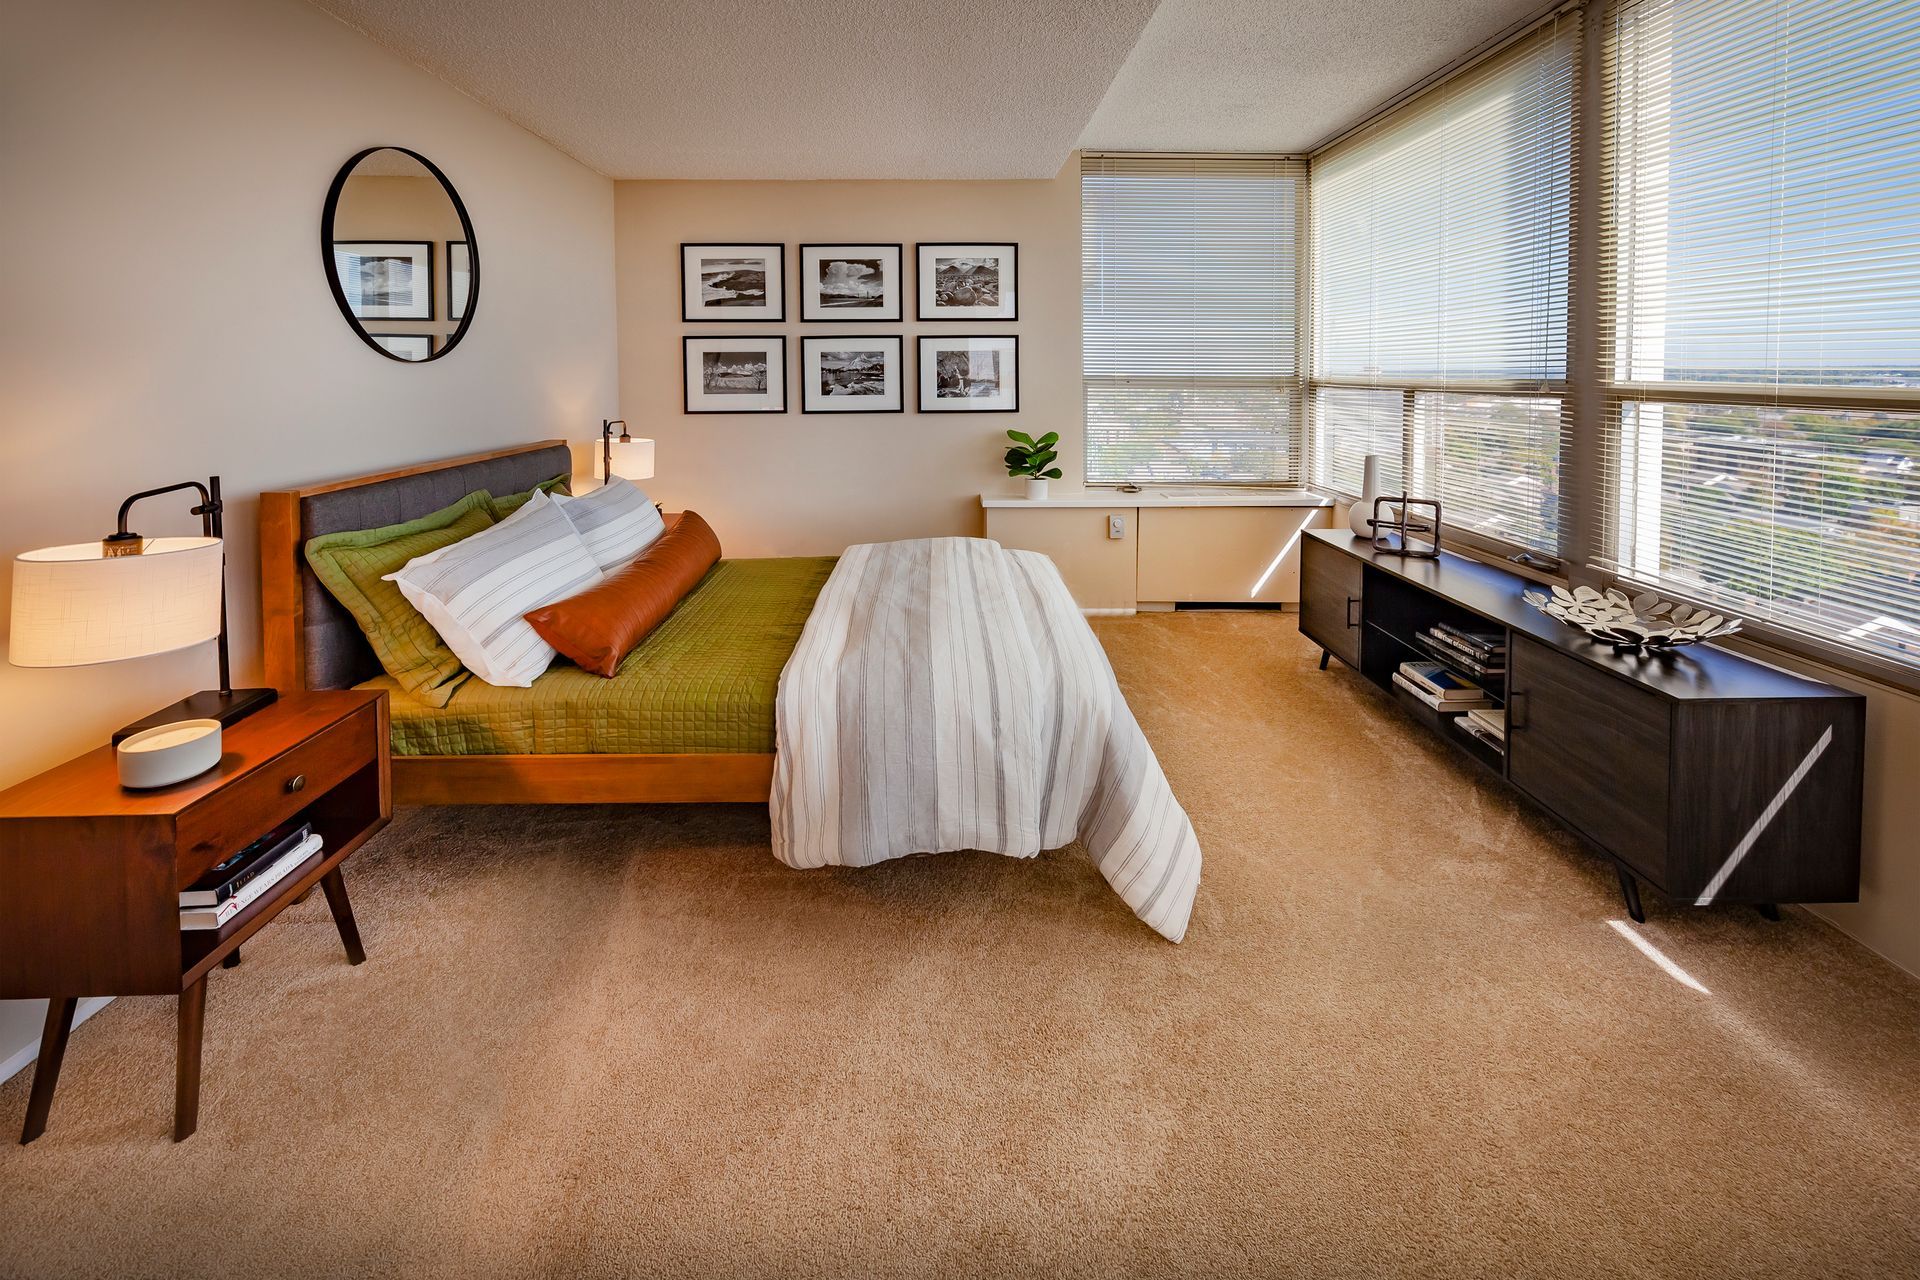 A bedroom with a bed , nightstand , mirror and dresser at  Riley Towers, Indianapolis, IN. 